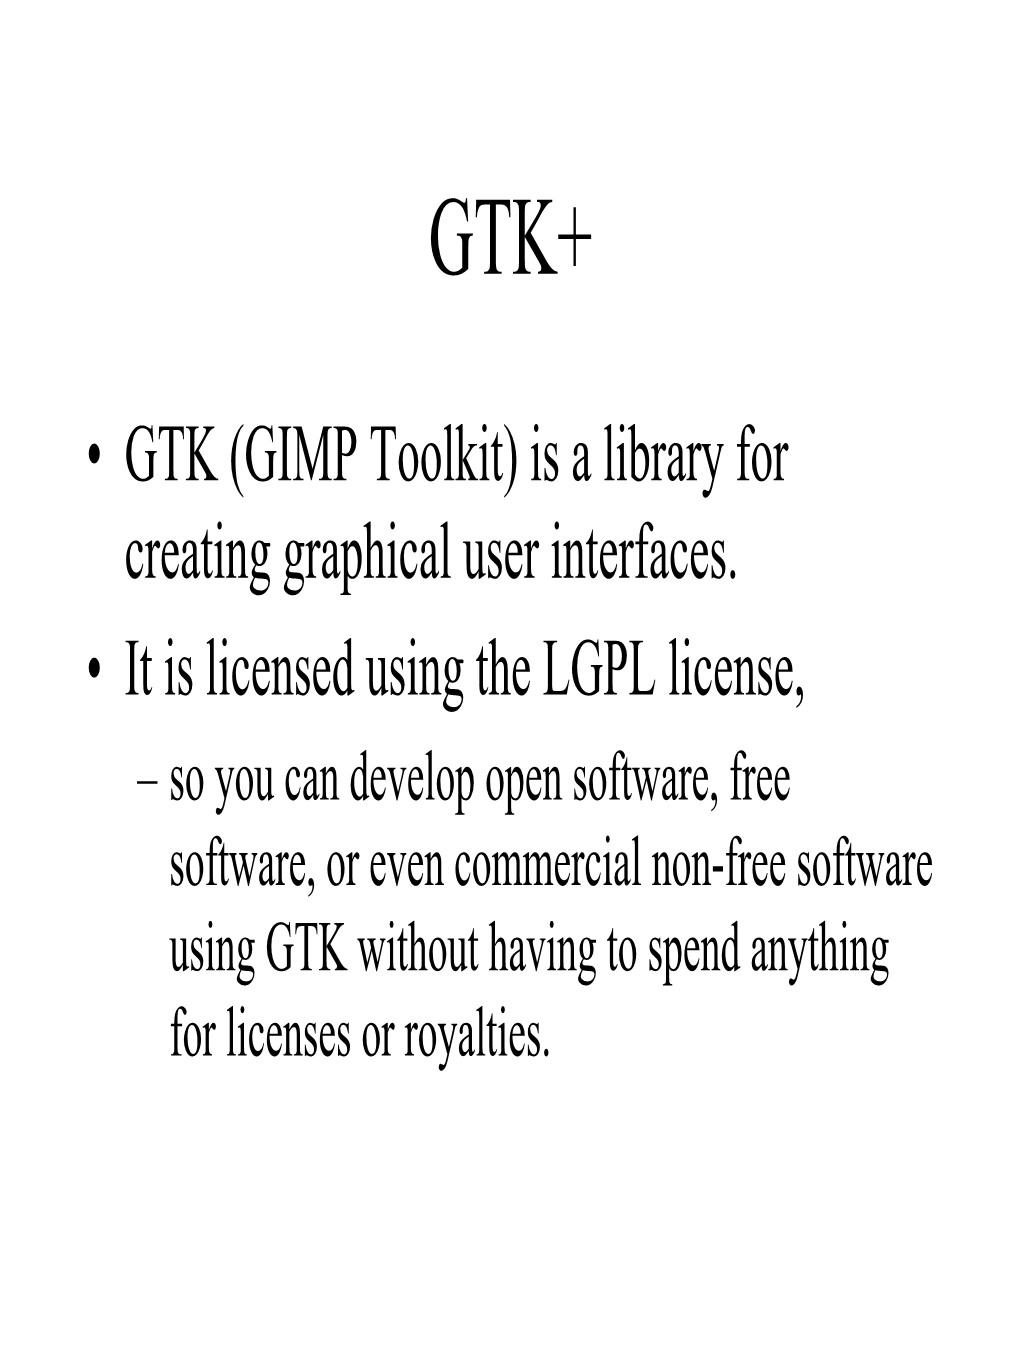 • GTK (GIMP Toolkit) Is a Library for Creating Graphical User Interfaces